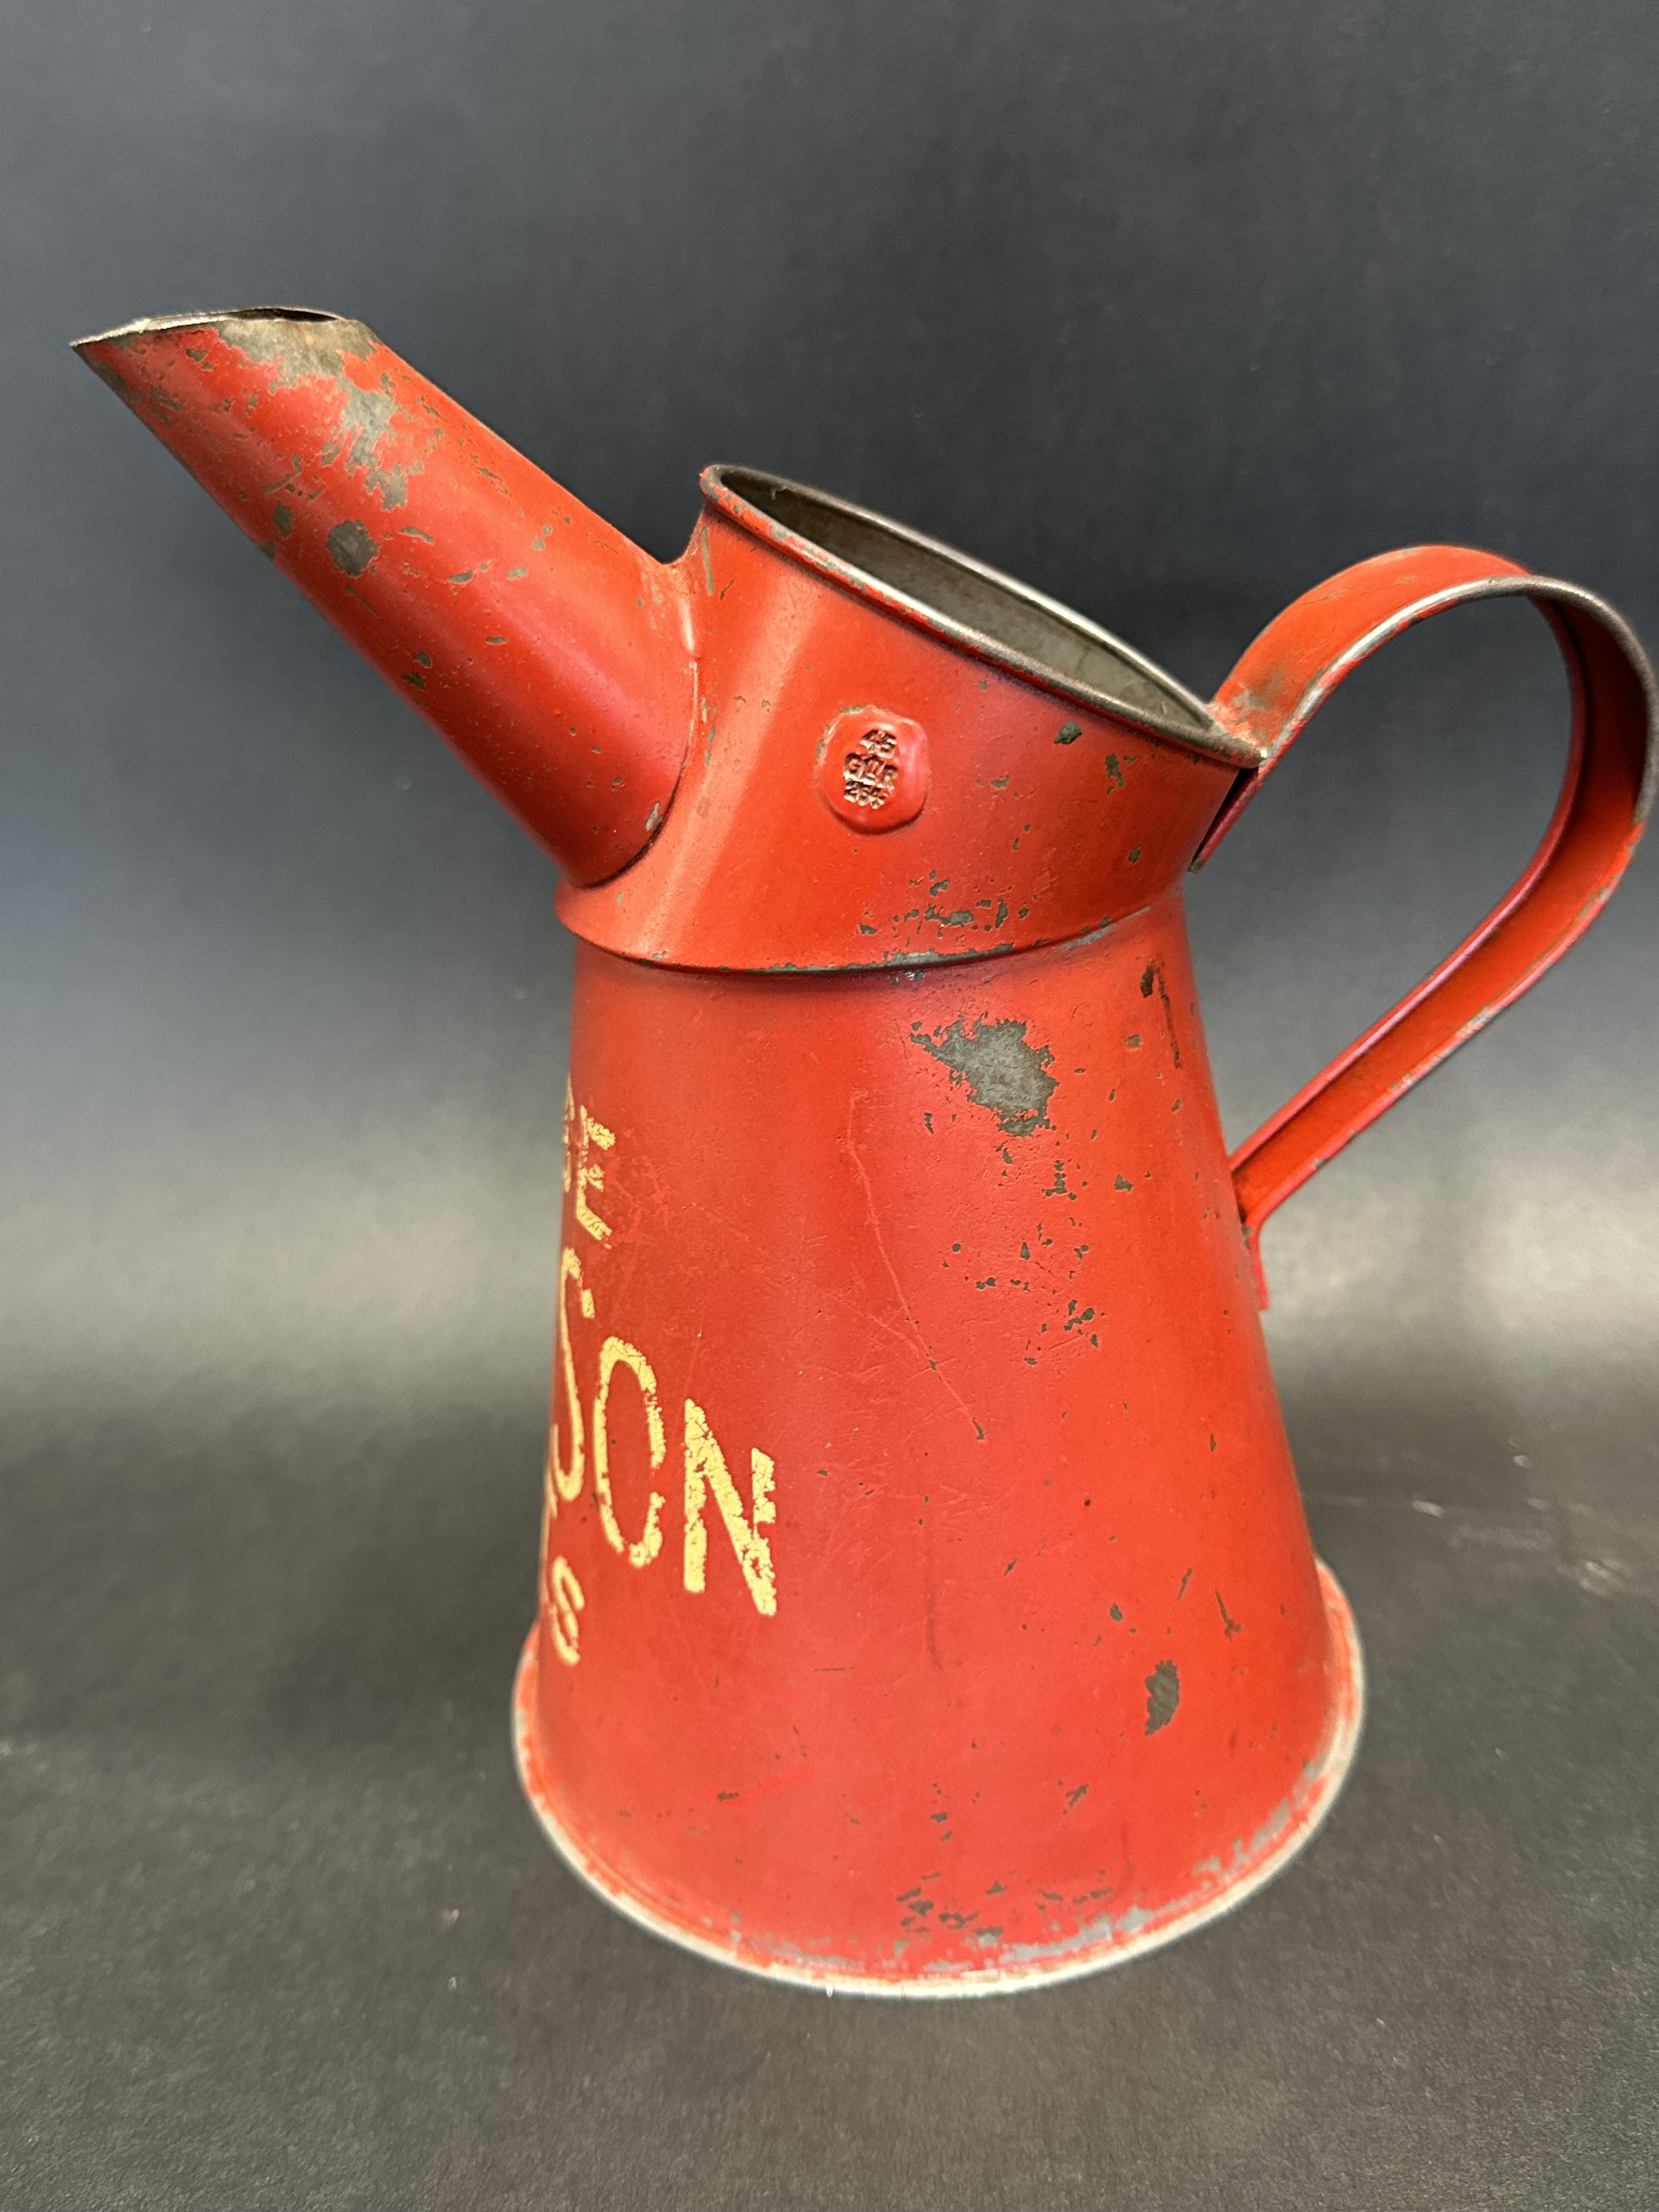 A Thelson quart measure dated 1945. - Image 3 of 6